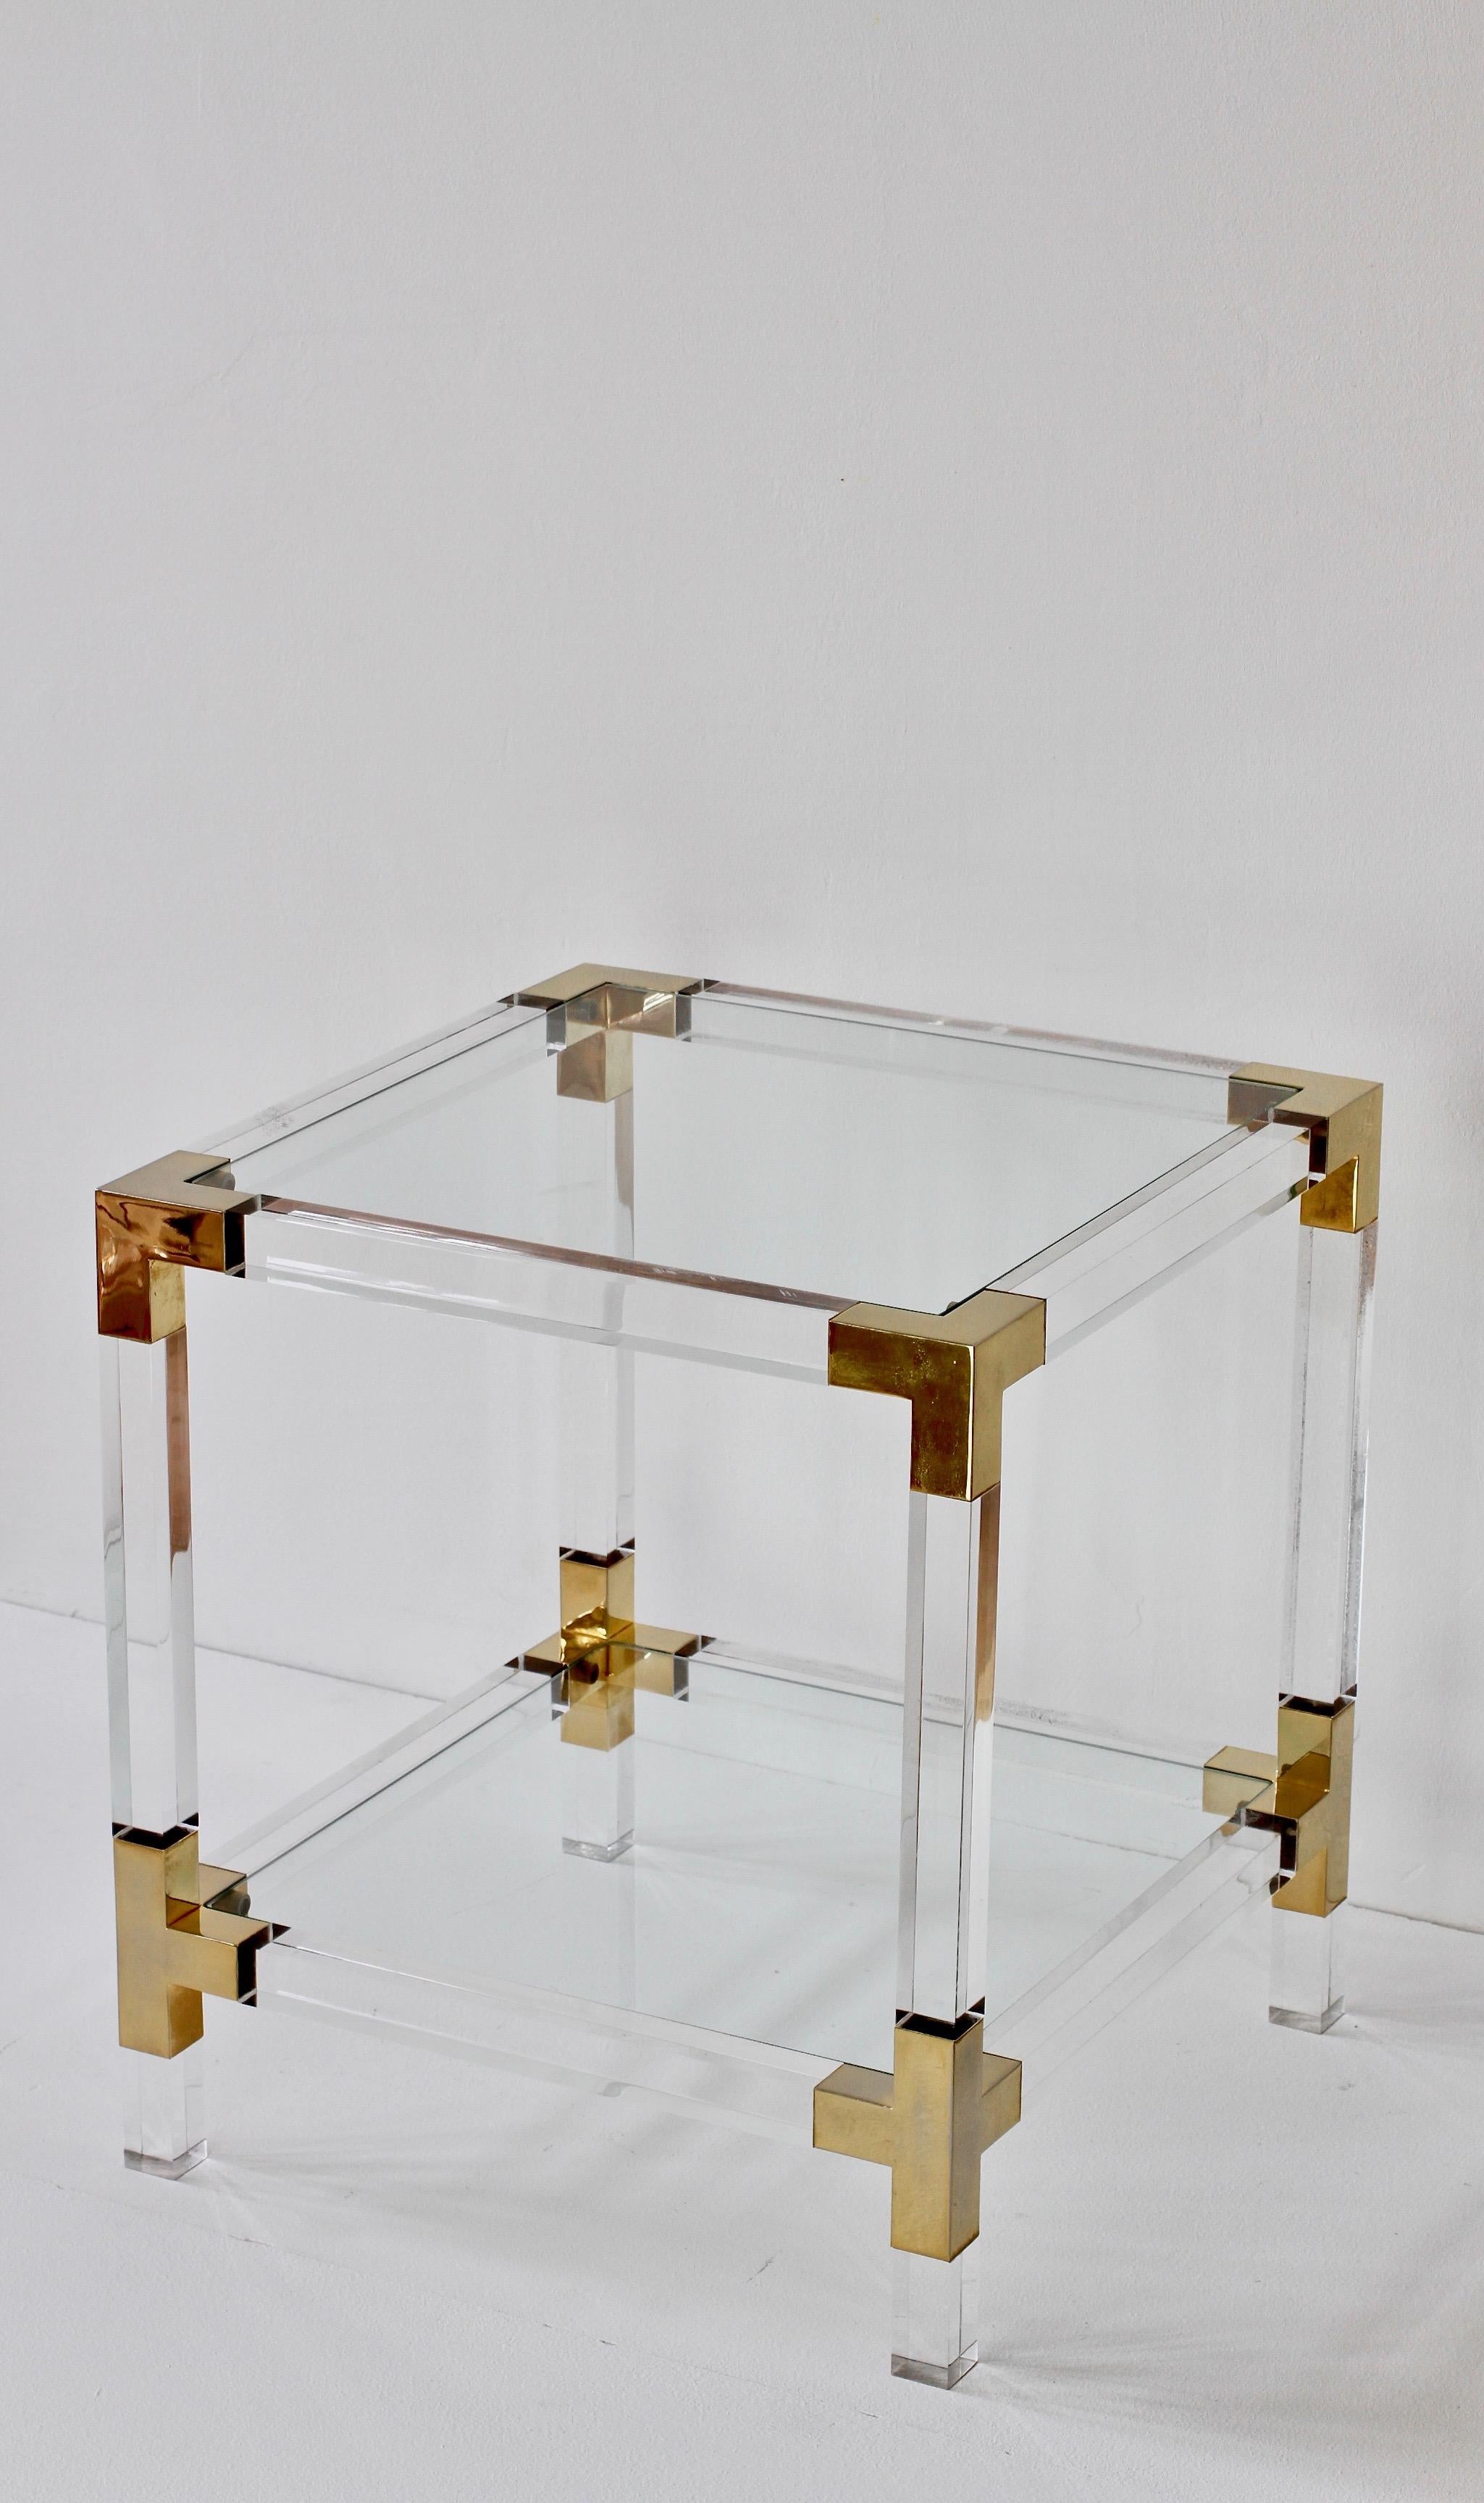 Charles Hollis Jones 'Metric' style square two-tiered (double shelf) side or end table made of Lucite / Acrylic with glass tabletop and brass corners and trim. Perfect for the modern Hollywood Regency style.
 

